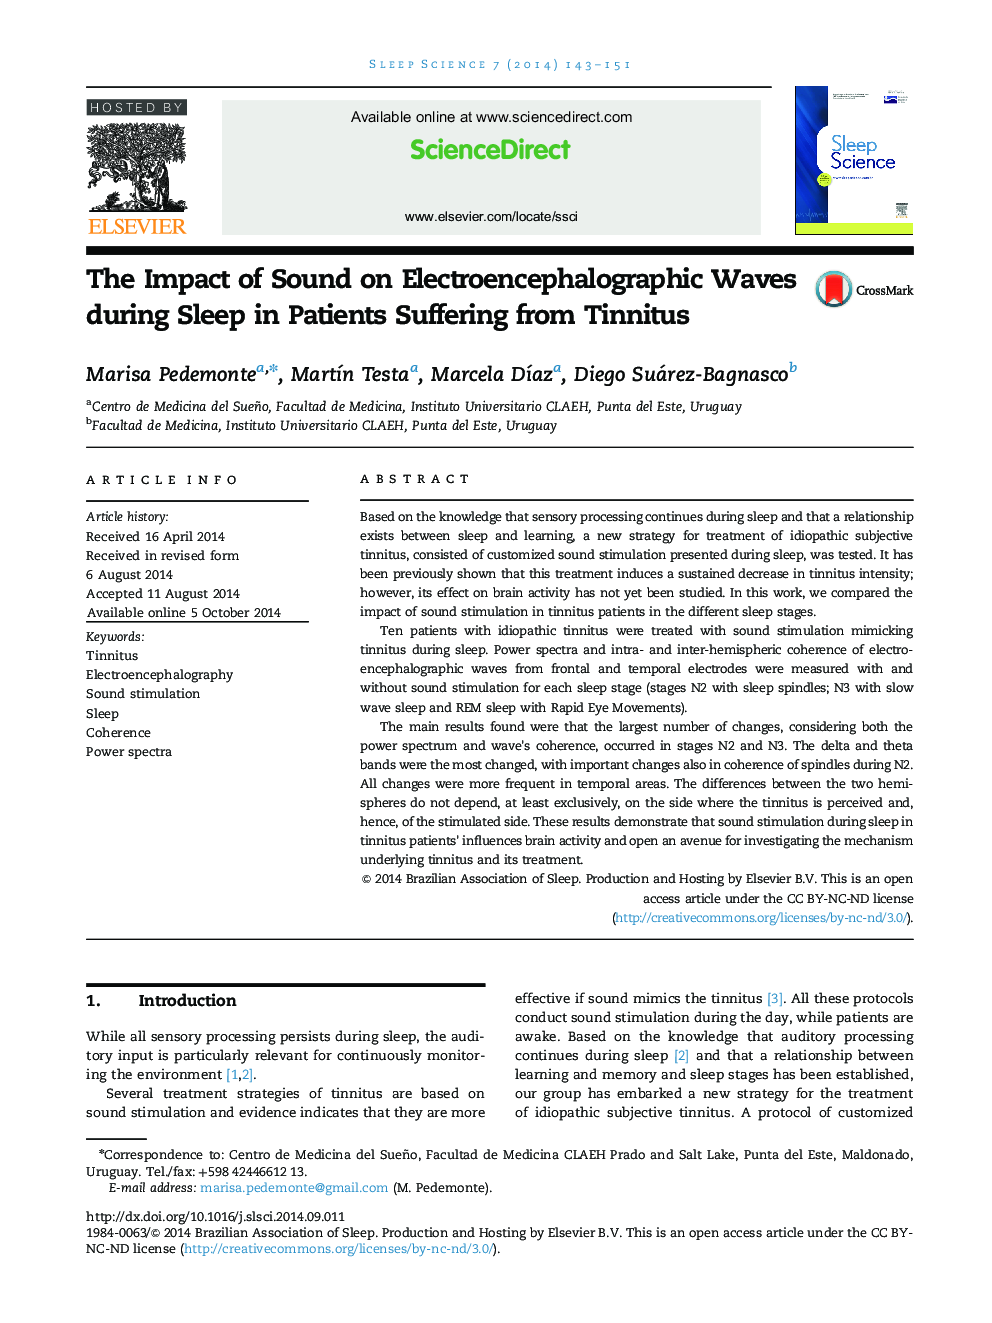 The Impact of Sound on Electroencephalographic Waves during Sleep in Patients Suffering from Tinnitus